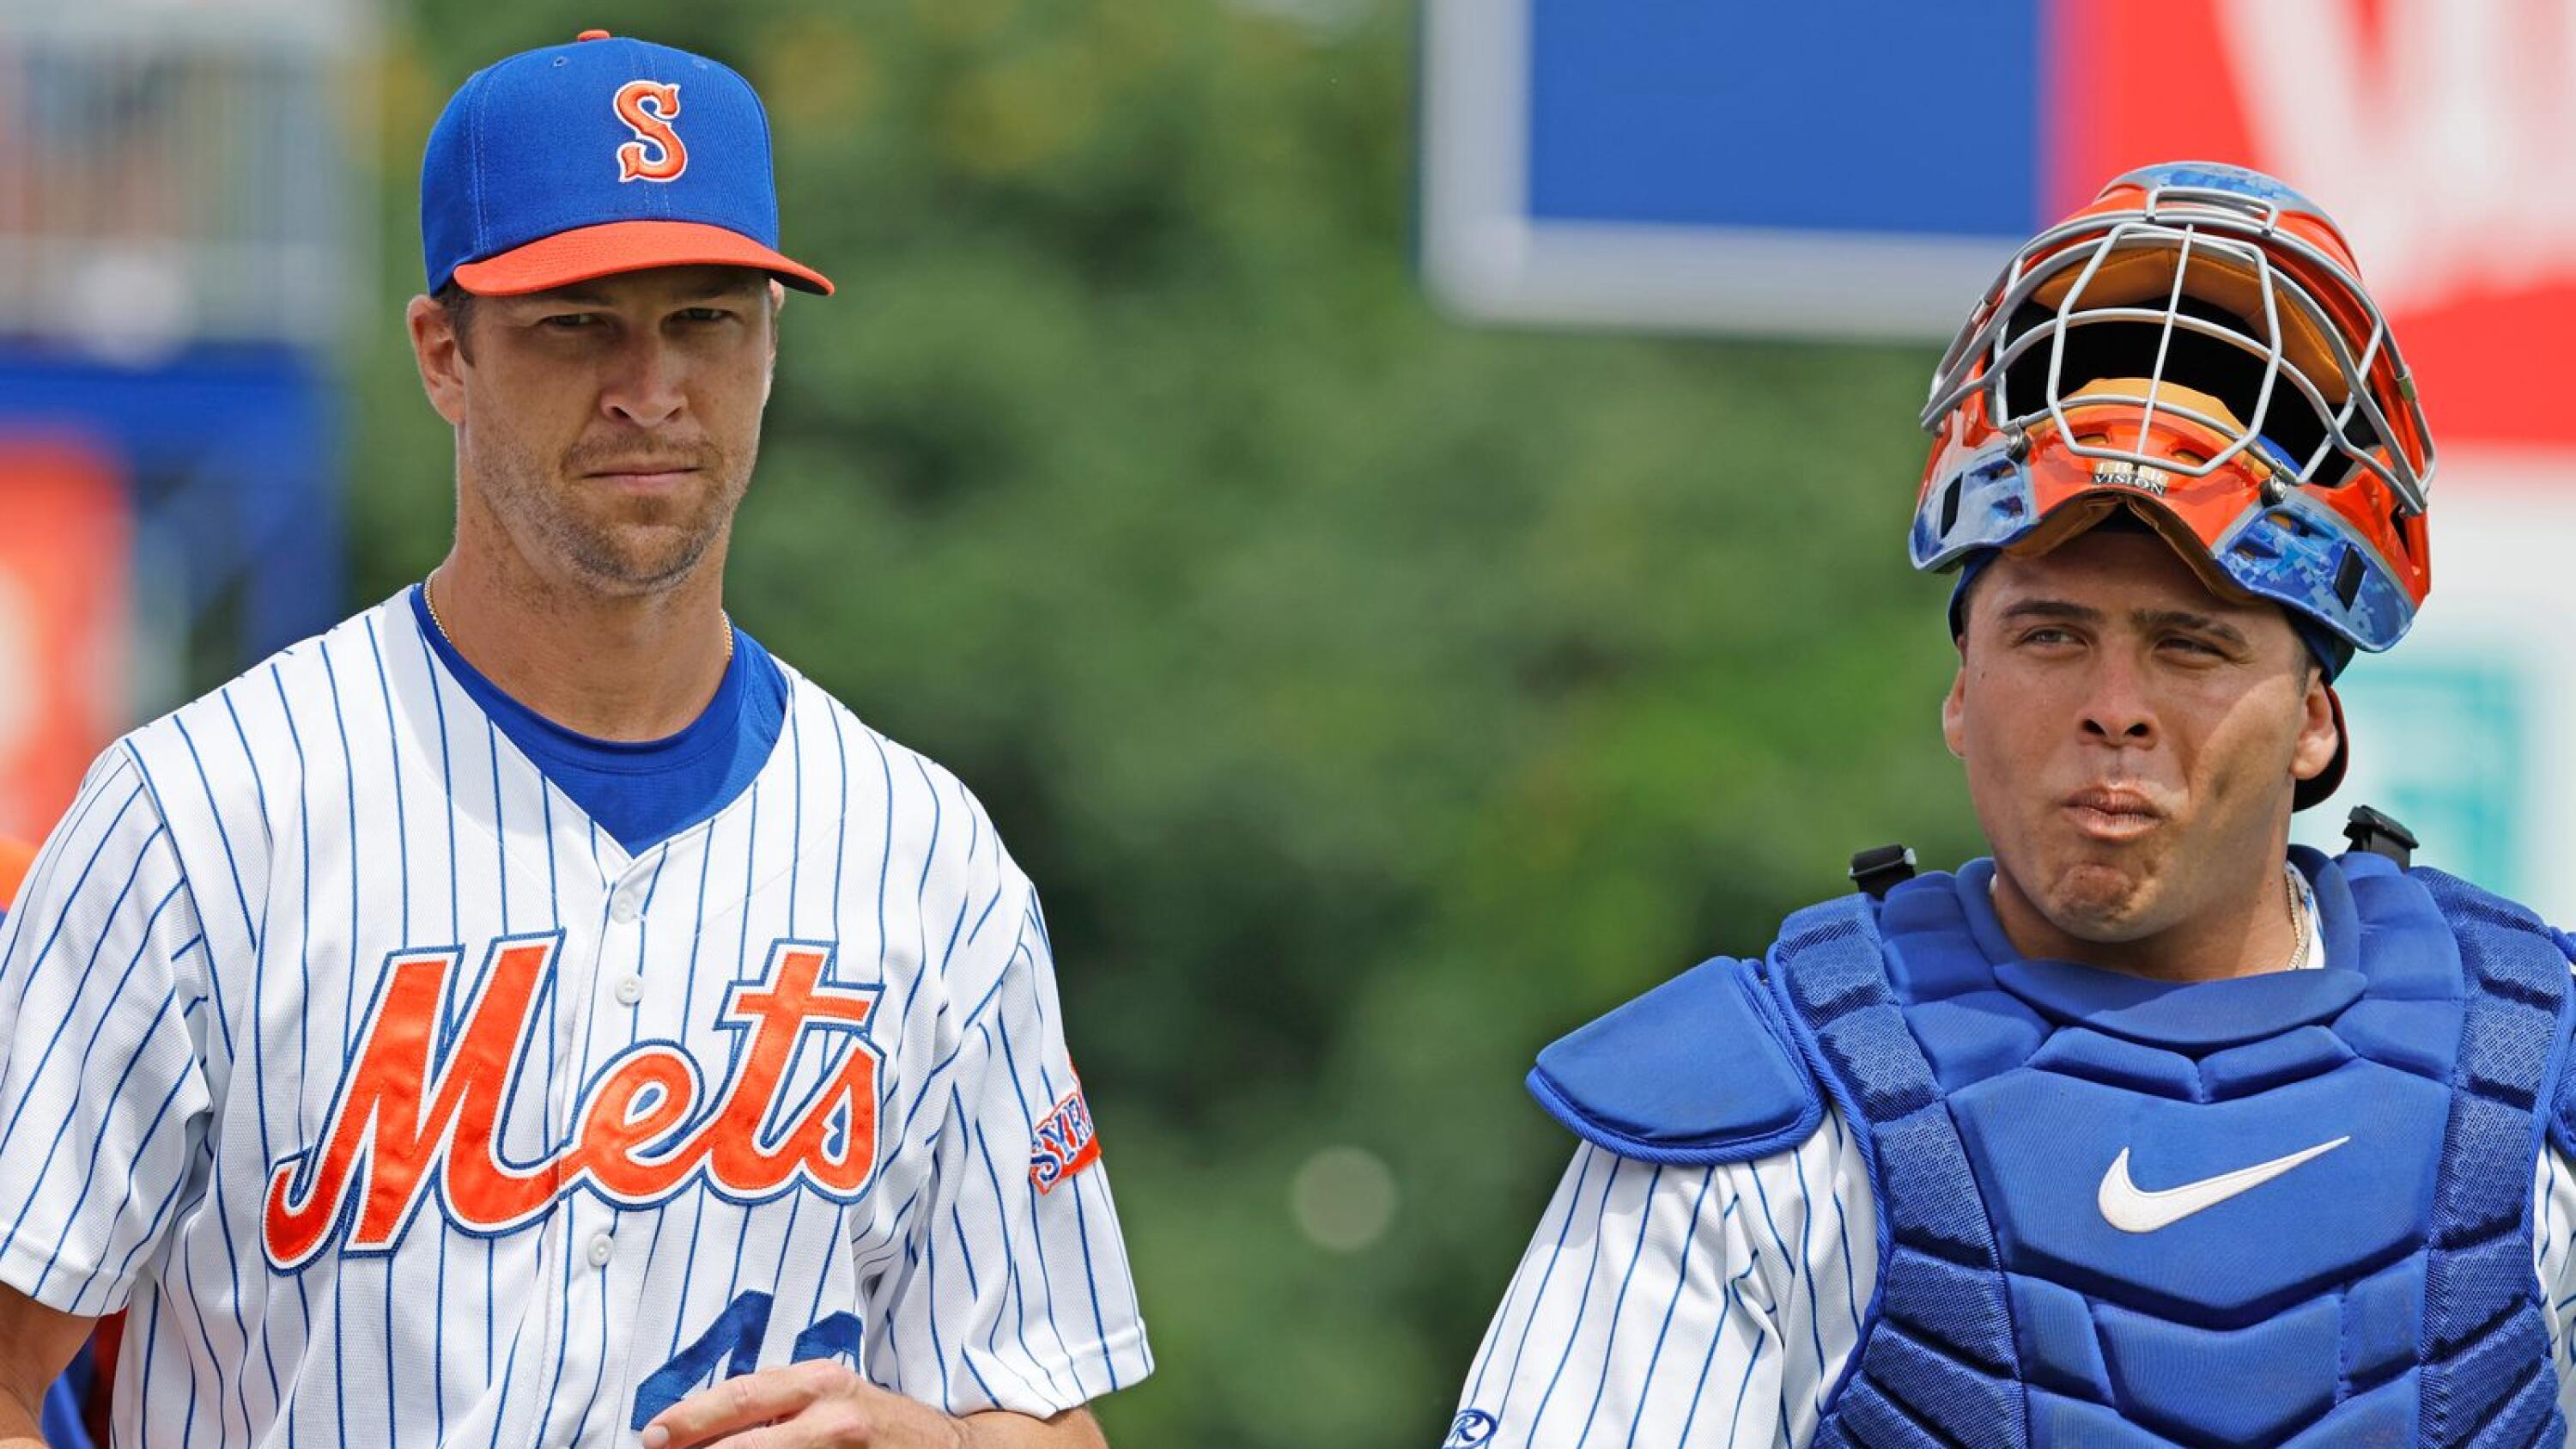 Grant McAuley on X: Jacob deGrom to the #Braves? That's a